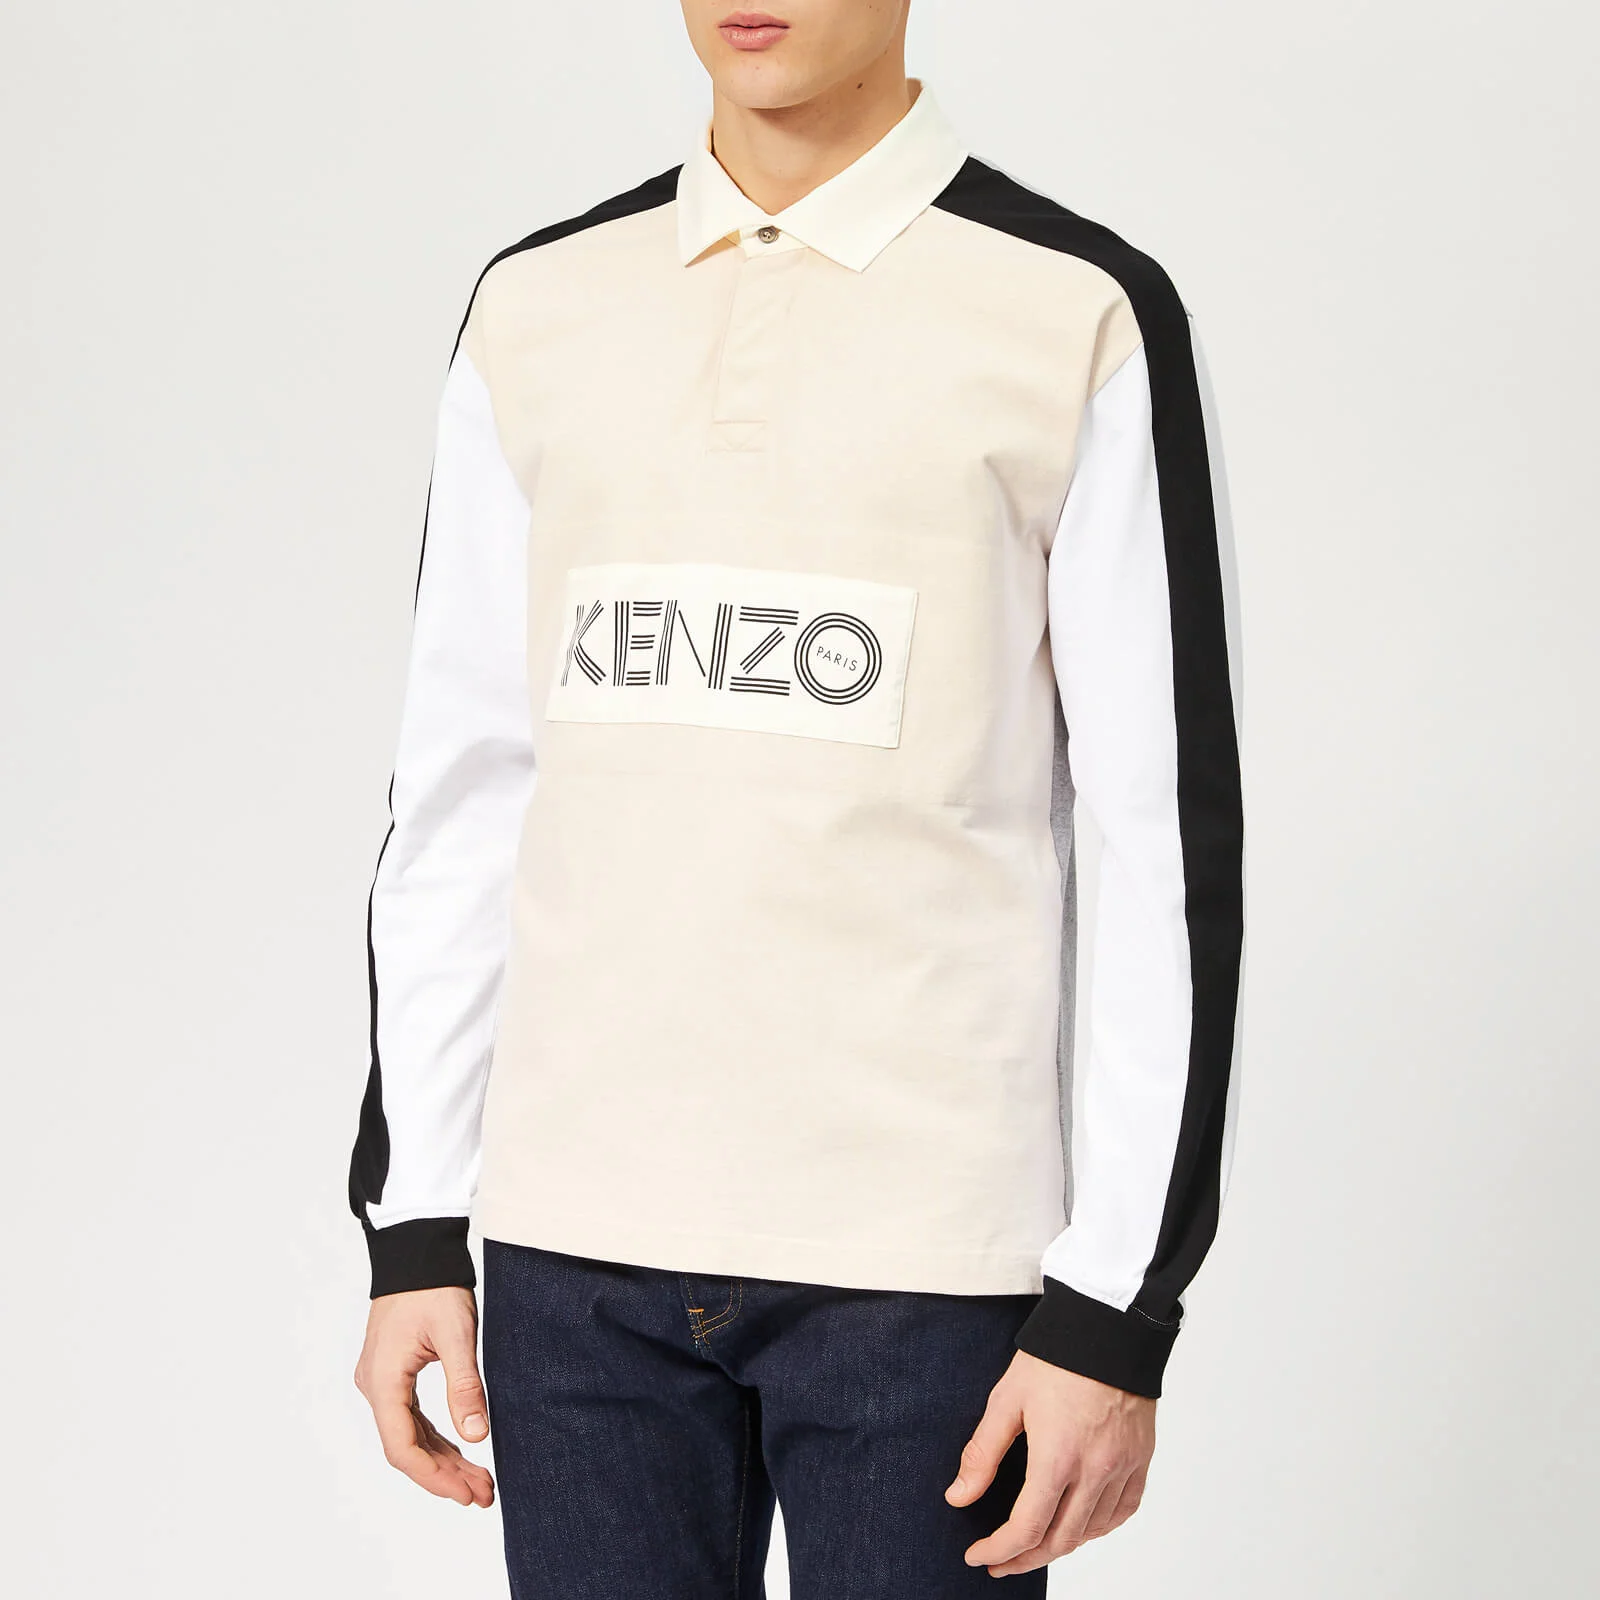 KENZO Men's Chest Logo Rugby Polo Shirt - Cream Image 1